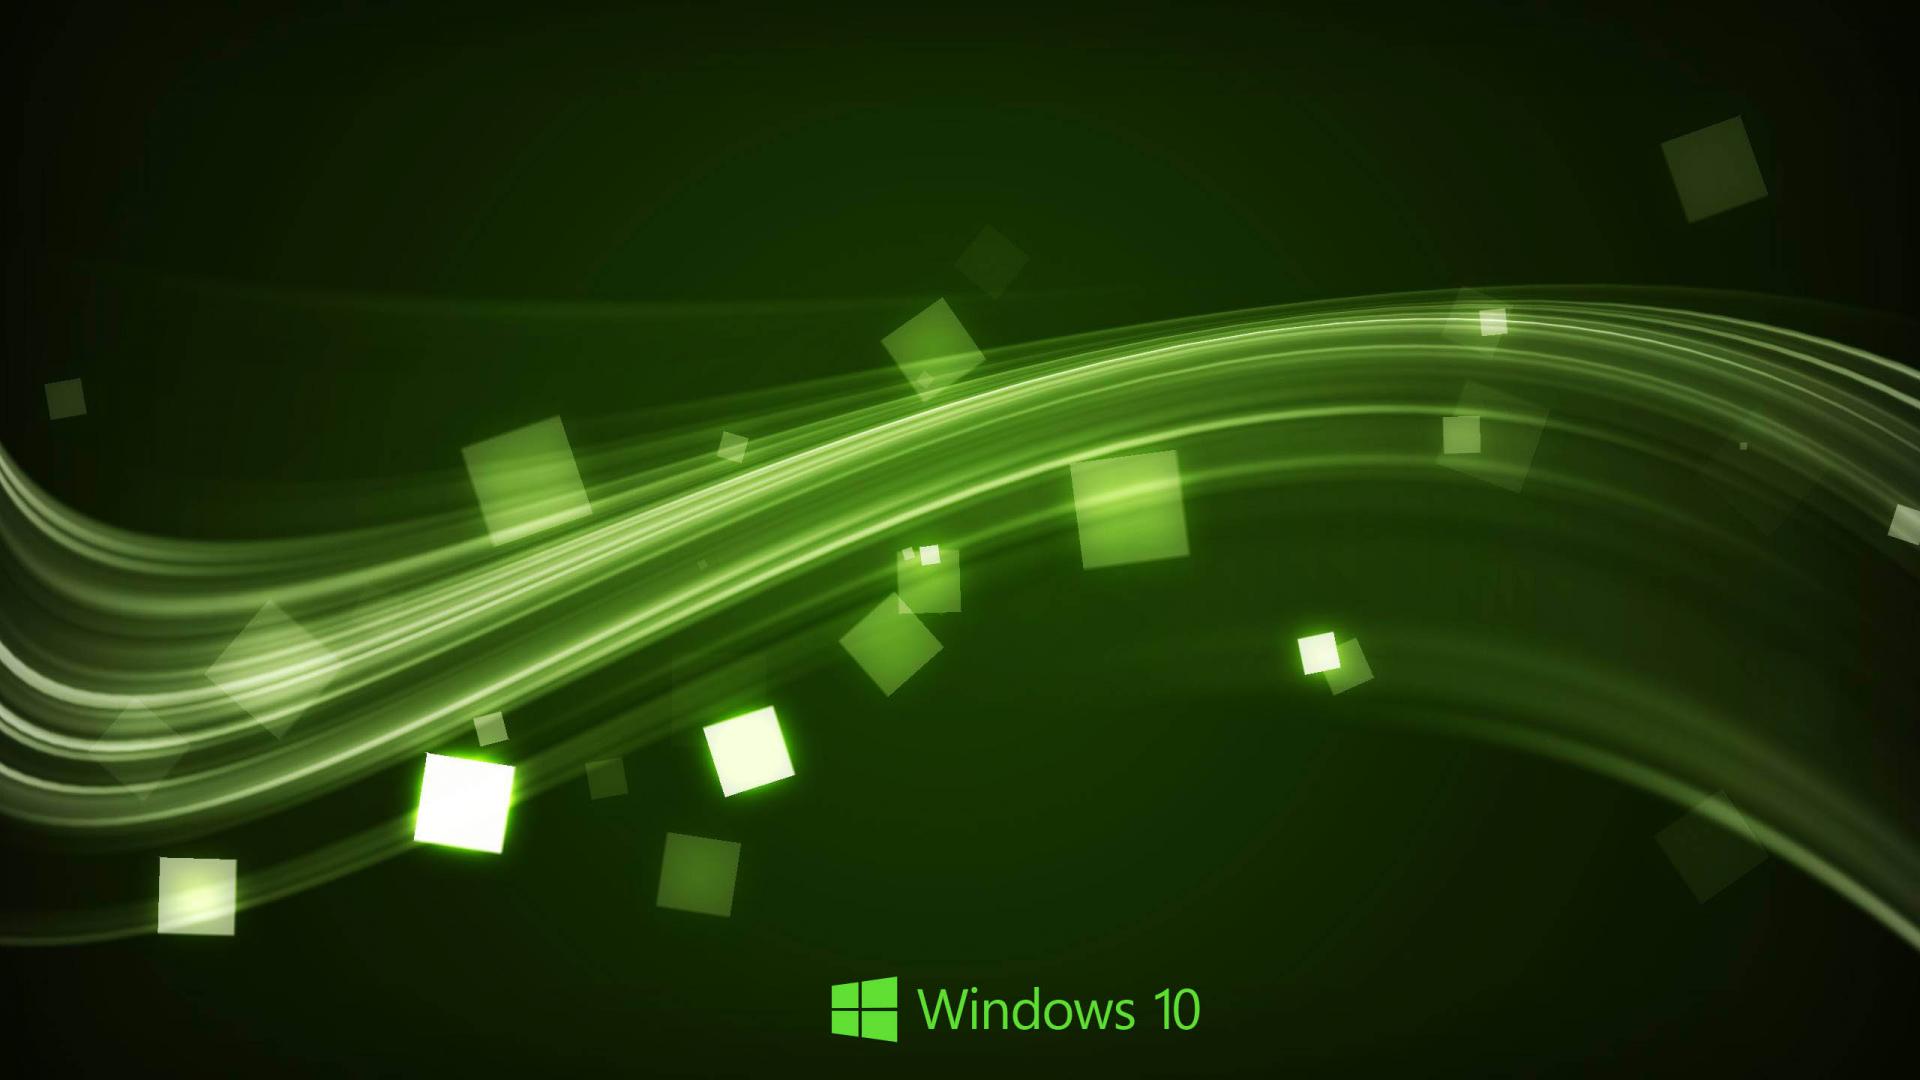 Free Download Windows 10 Wallpaper In Abstract Green Waves Hd Wallpapers For 1920x1080 For Your Desktop Mobile Tablet Explore 48 Windows 10 Hd Wallpaper Widescreen Hd Wallpapers 1920x1080 Windows